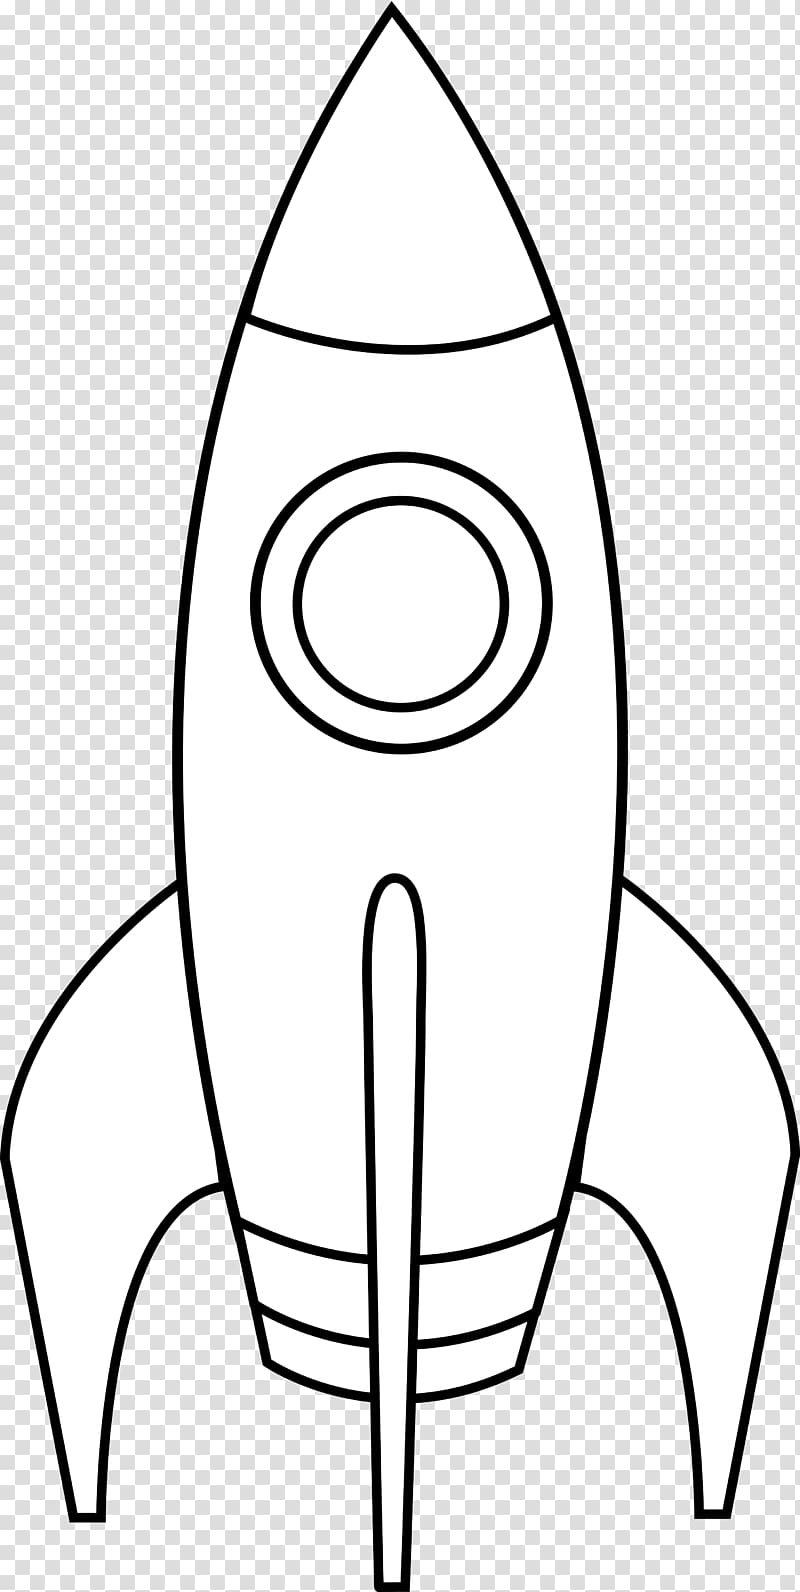 Rocket Spacecraft Black and white , Vintage Spaceship transparent background PNG clipart